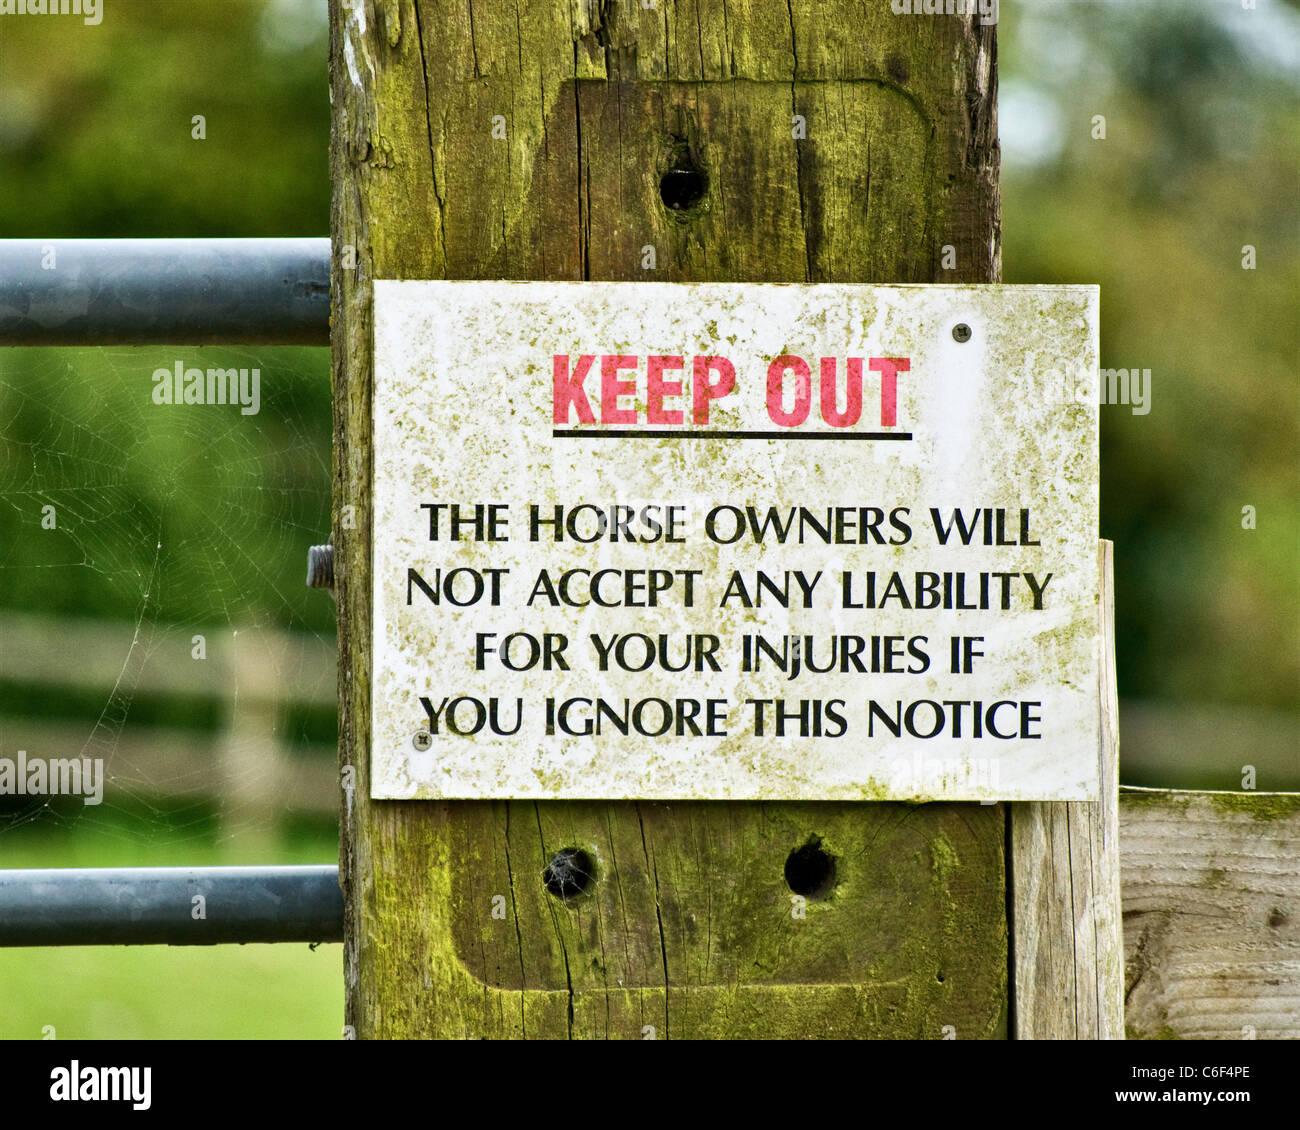 Sign, Keep out, The horse owners will not accept any liability for your injuries if you ignore this notice Stock Photo